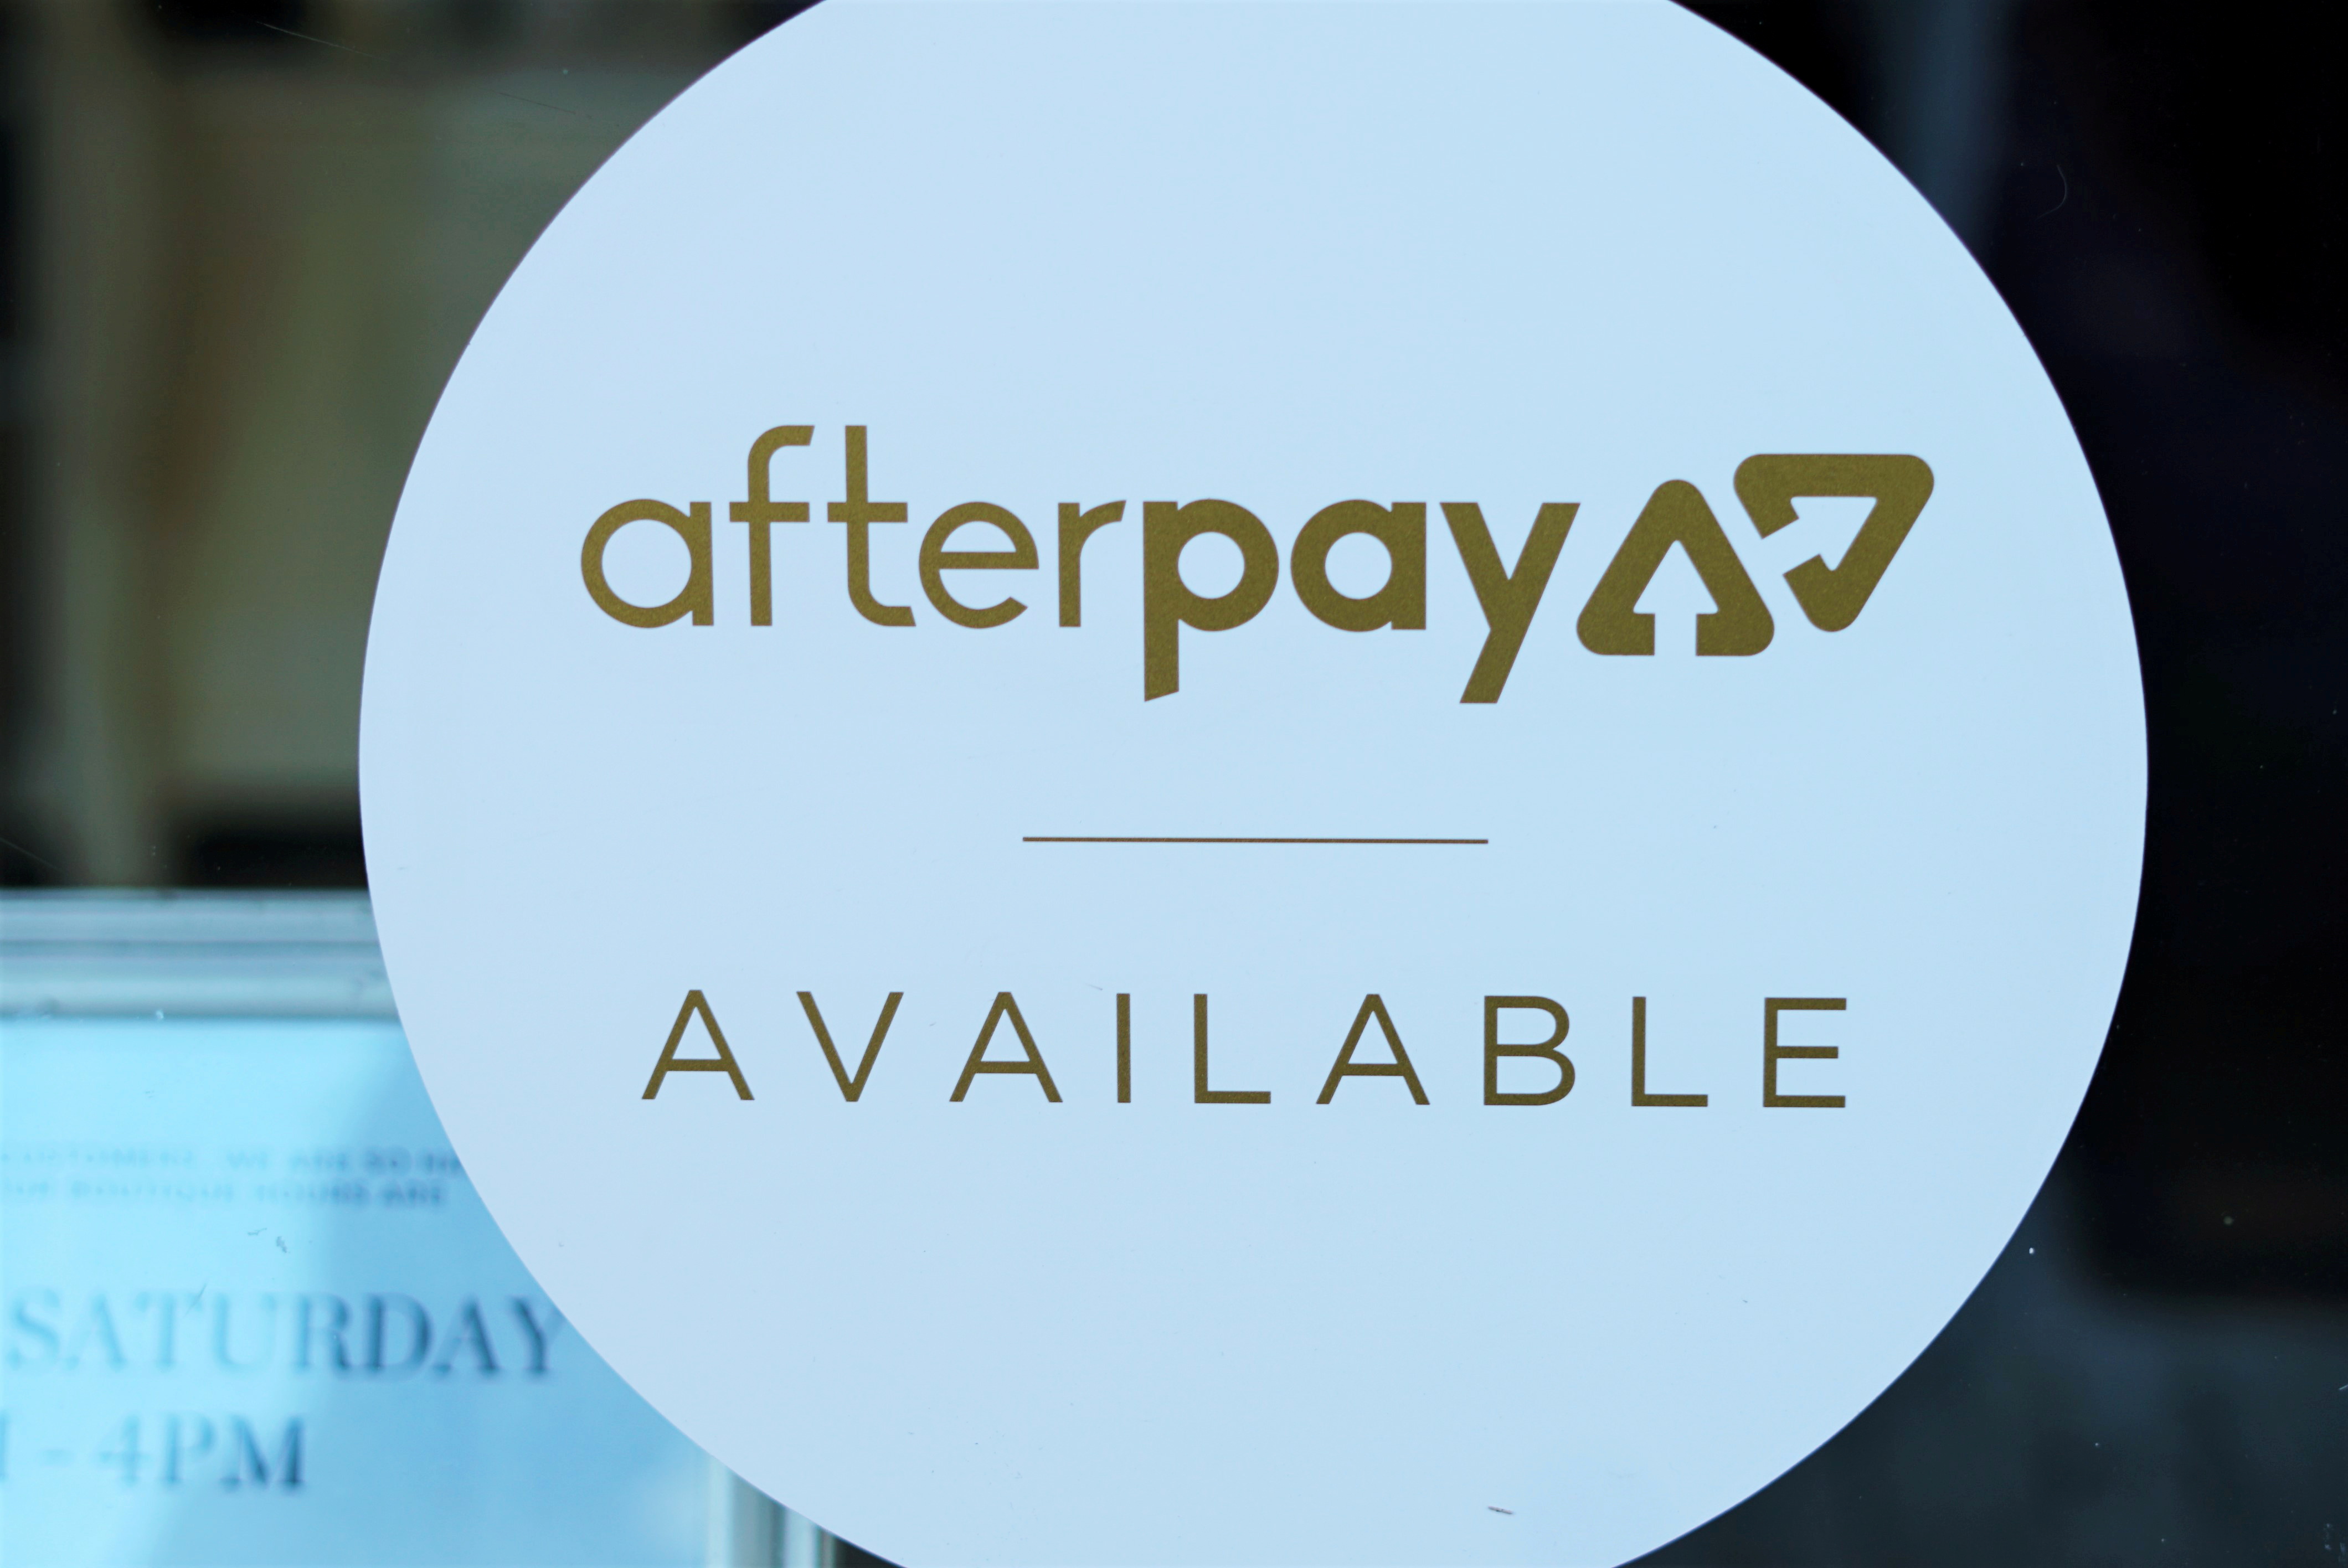 Square agrees to acquire Afterpay for $29 billion in all-stock deal